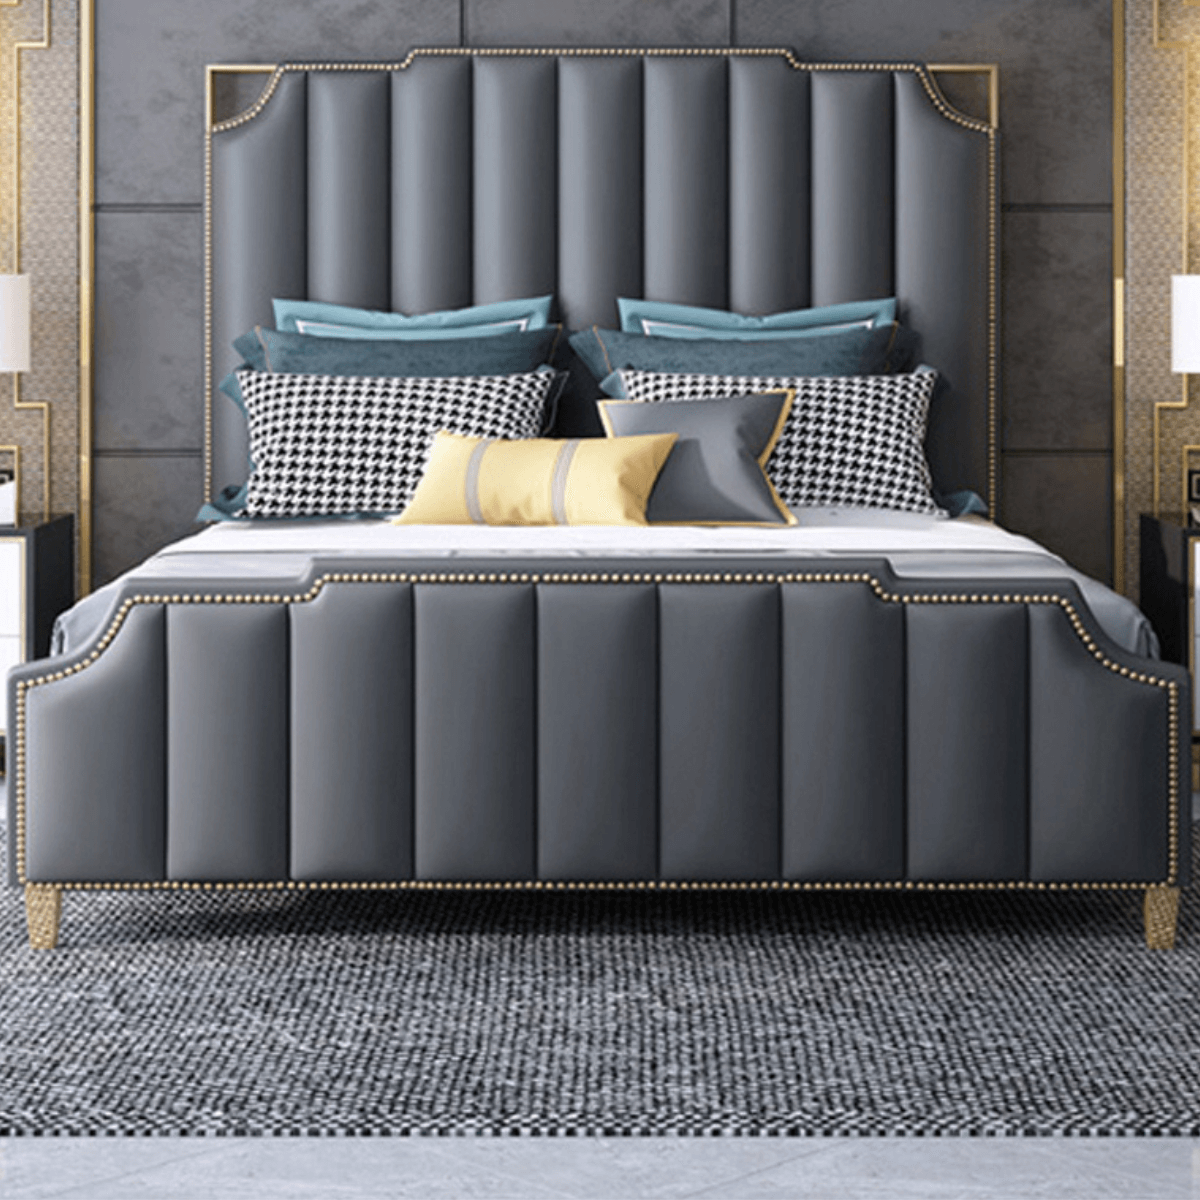 Faux-leather-storage-king-bed-in-Australia-8